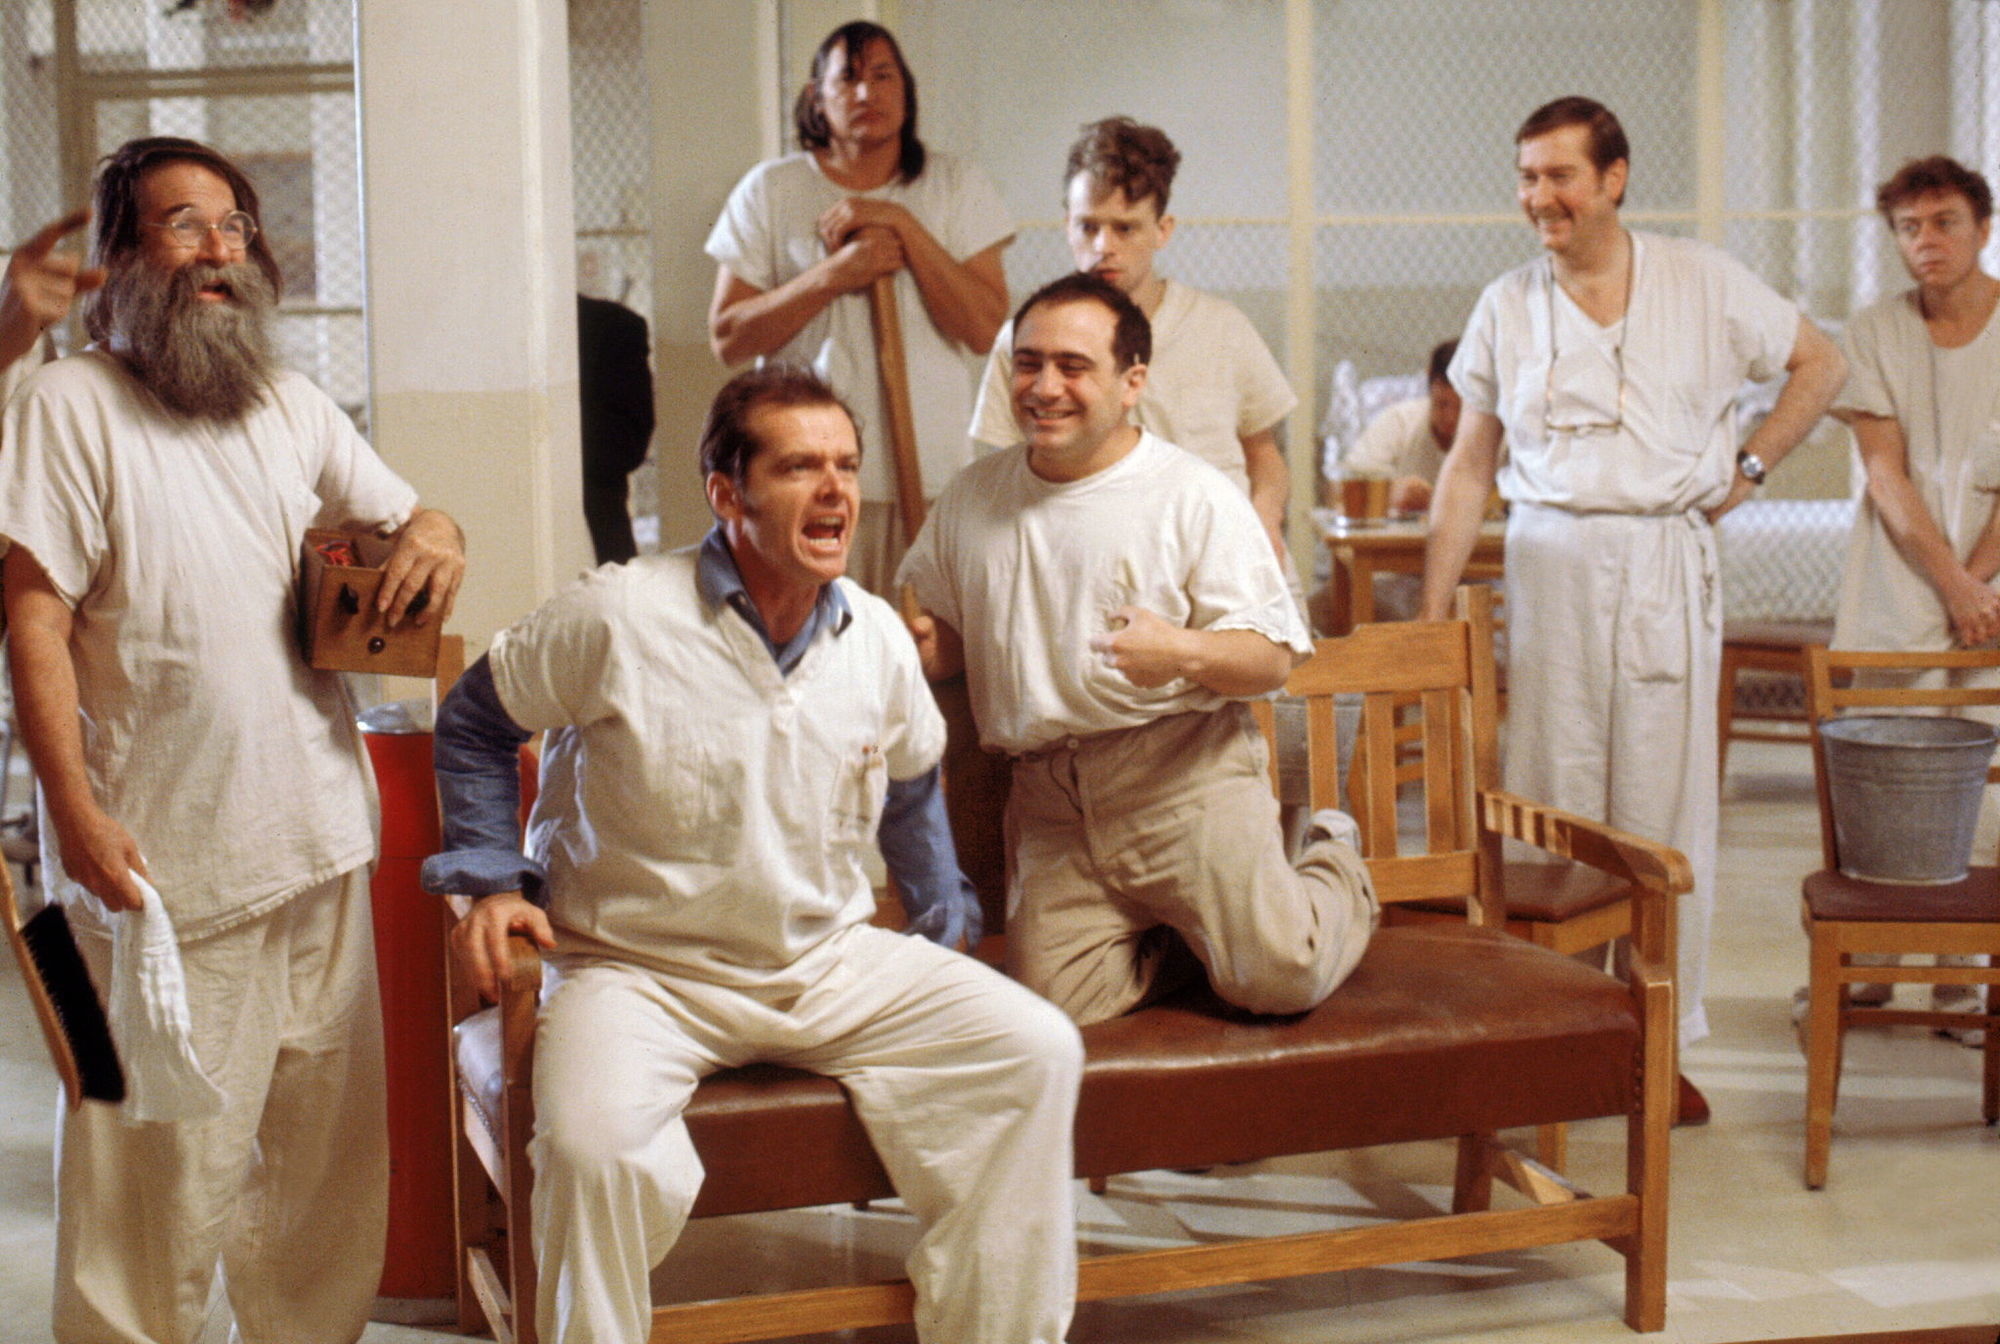 This film swept all five major awards, including Best Picture, at the 48th Academy Awards, and was selected for preservation in the National Film Registry in 1993.

The plot focuses on McMurphy, played by Jack Nicholson, who pleads insanity in a case so that he could avoid time in prison. As a result, he is sent to a mental institution.

Filmed at the real life Oregon State Mental Hospital, the cast worked closely with admitted patients there (who were included as extras) and stayed in character while on set.